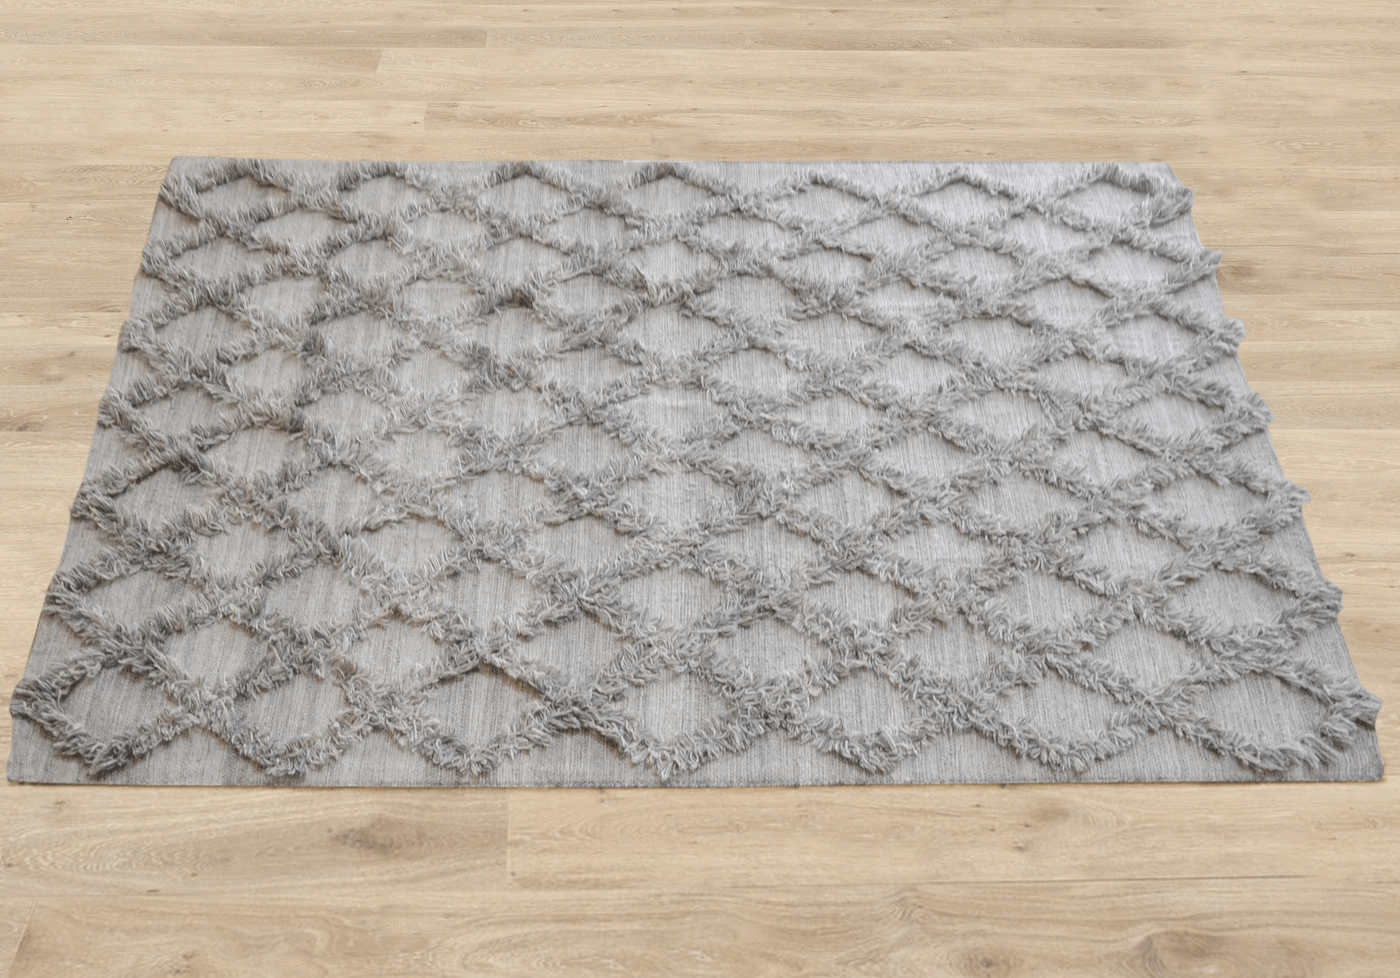 Huali Wool Rug-Comfort-NZ WOOL & WOOL RUGS, RUGS-Forest Homes-Nature inspired decor-Nature decor